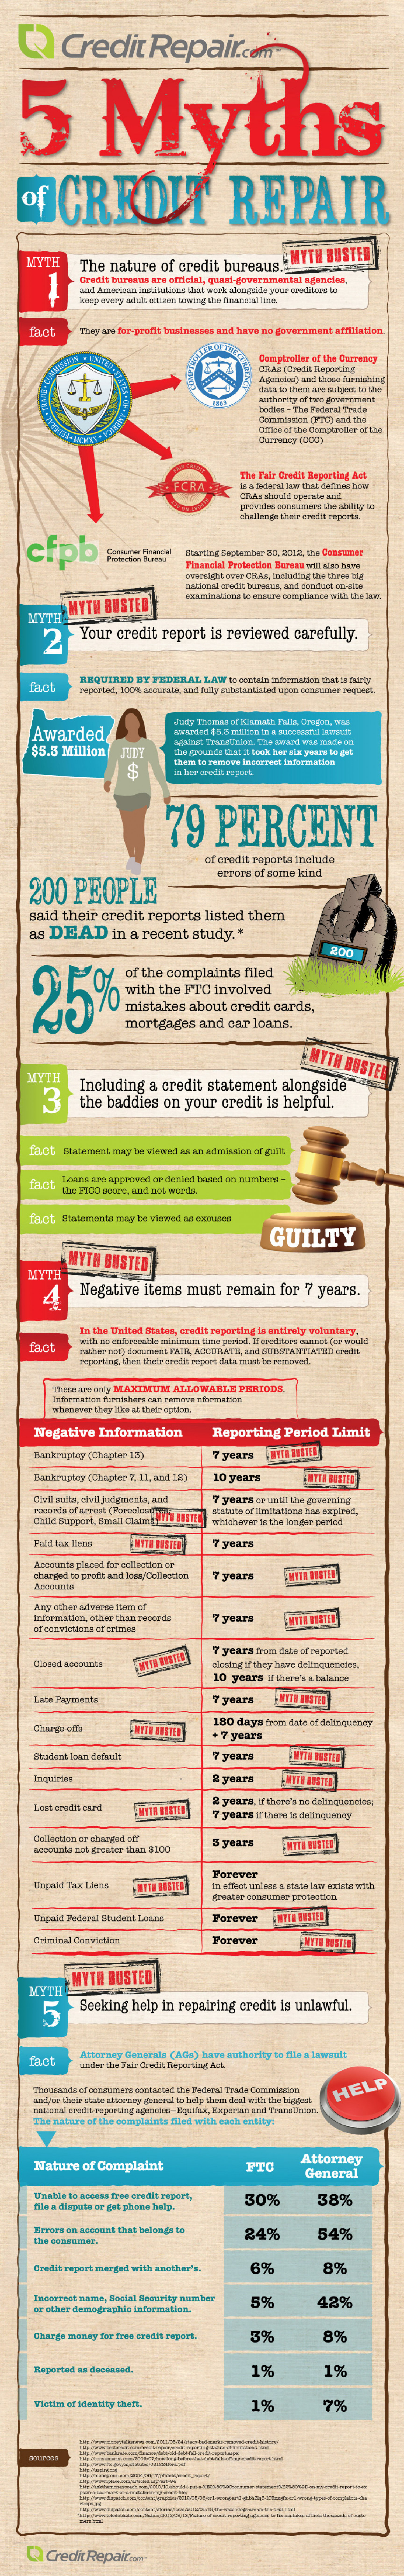 5 Myths of Credit Repair Infographic